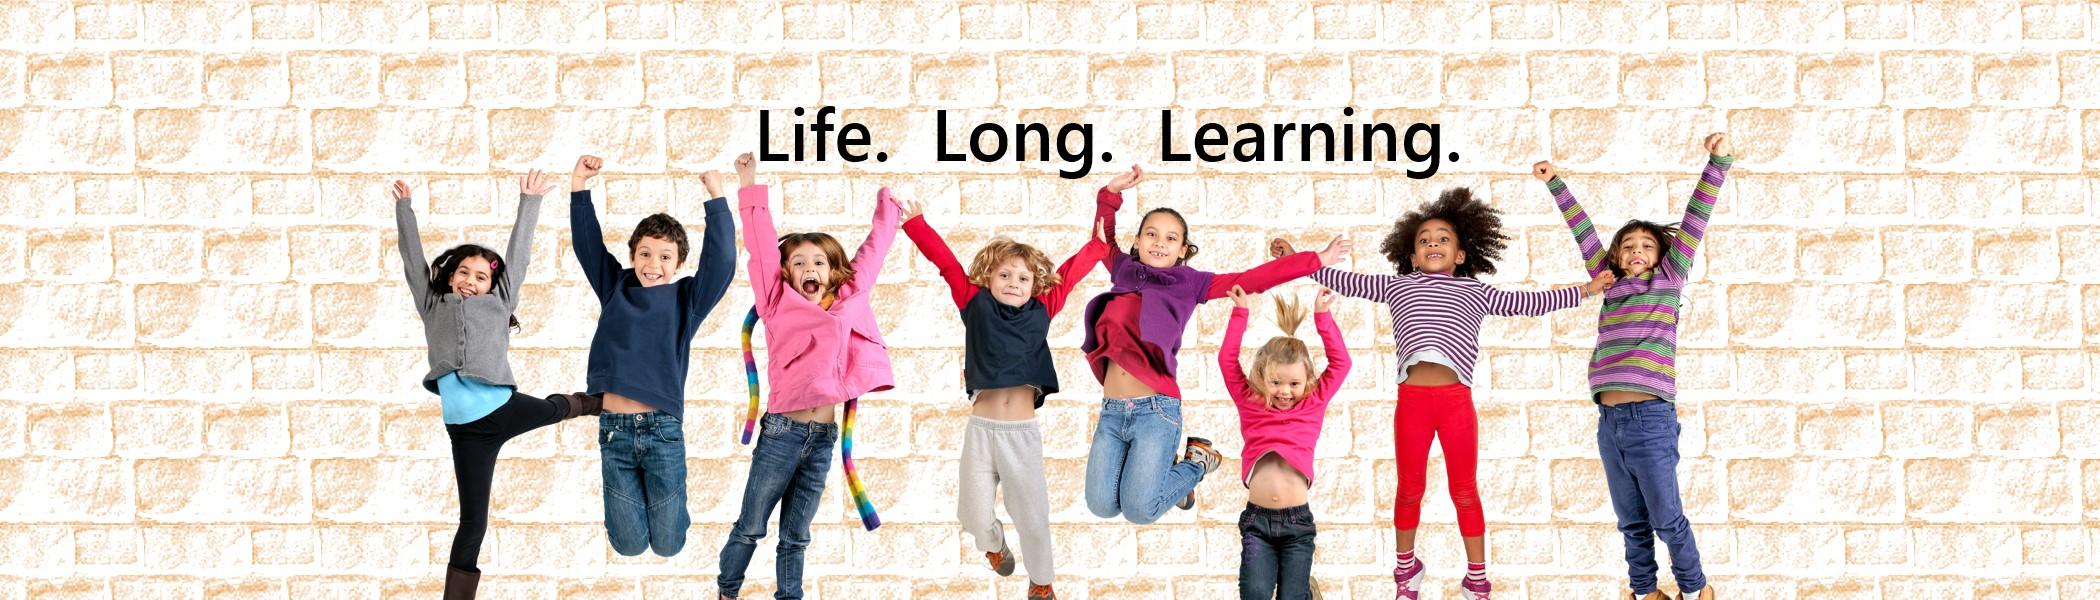 Children in a row jumping up with the words life long learning above them